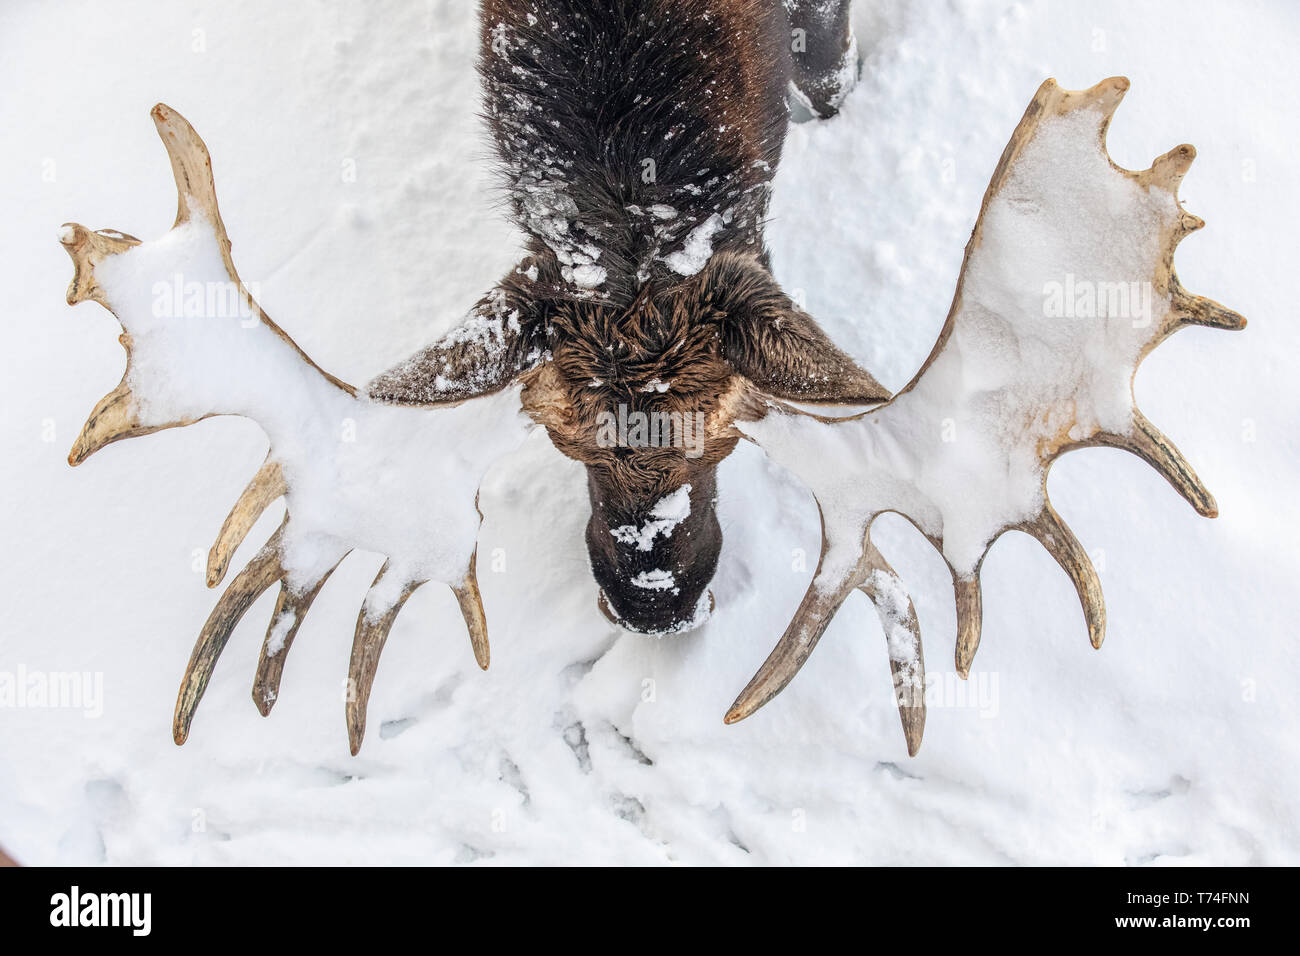 Mature bull moose (Alces alces) with antlers shed of velvet standing in snow, Alaska Wildlife Conservation Center, South-central Alaska Stock Photo